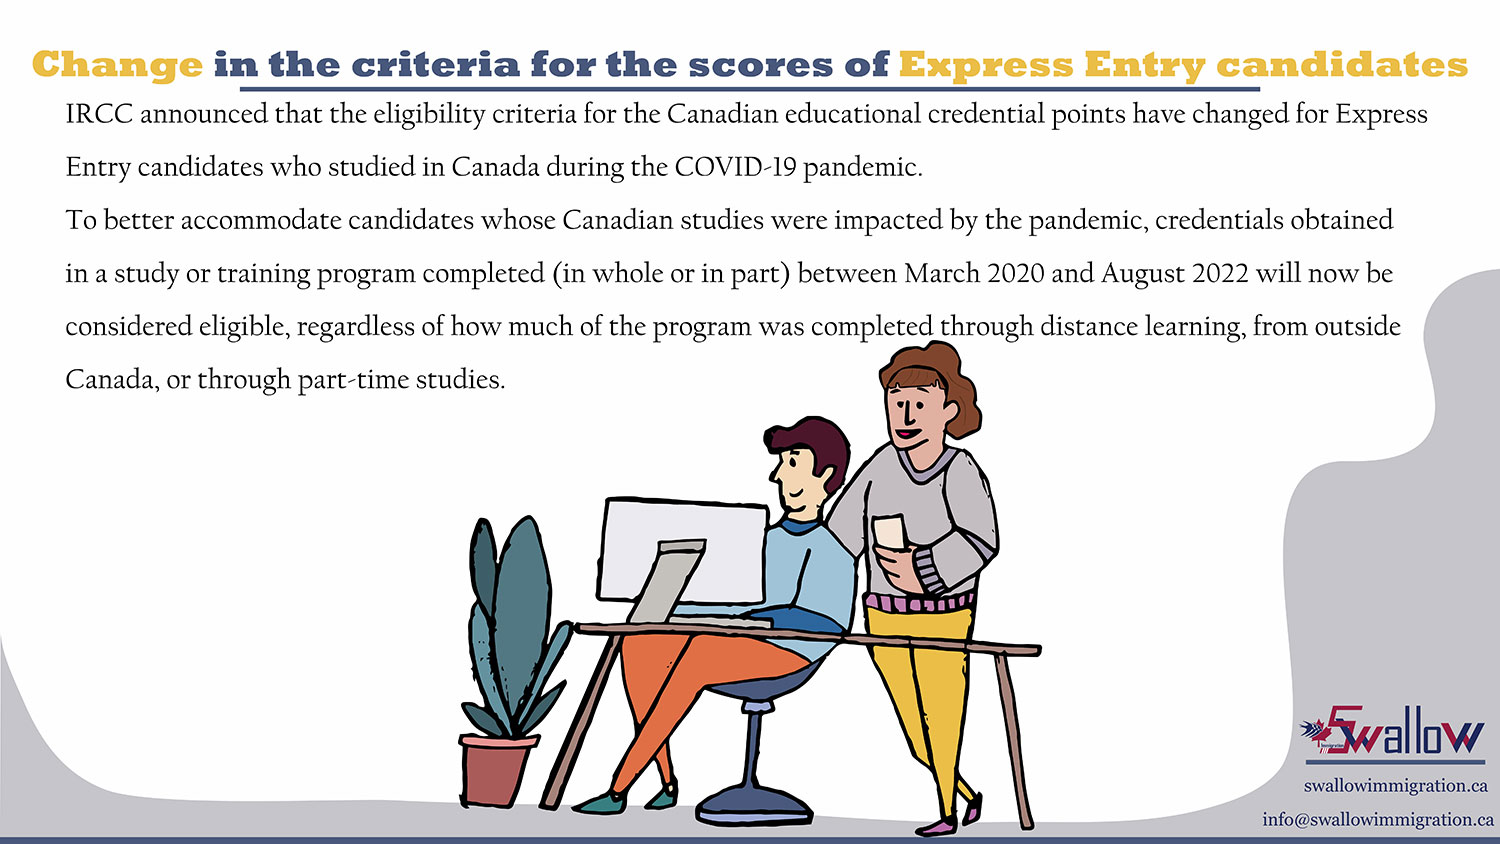 Change in the criteria for the scores of Express Entry candidates